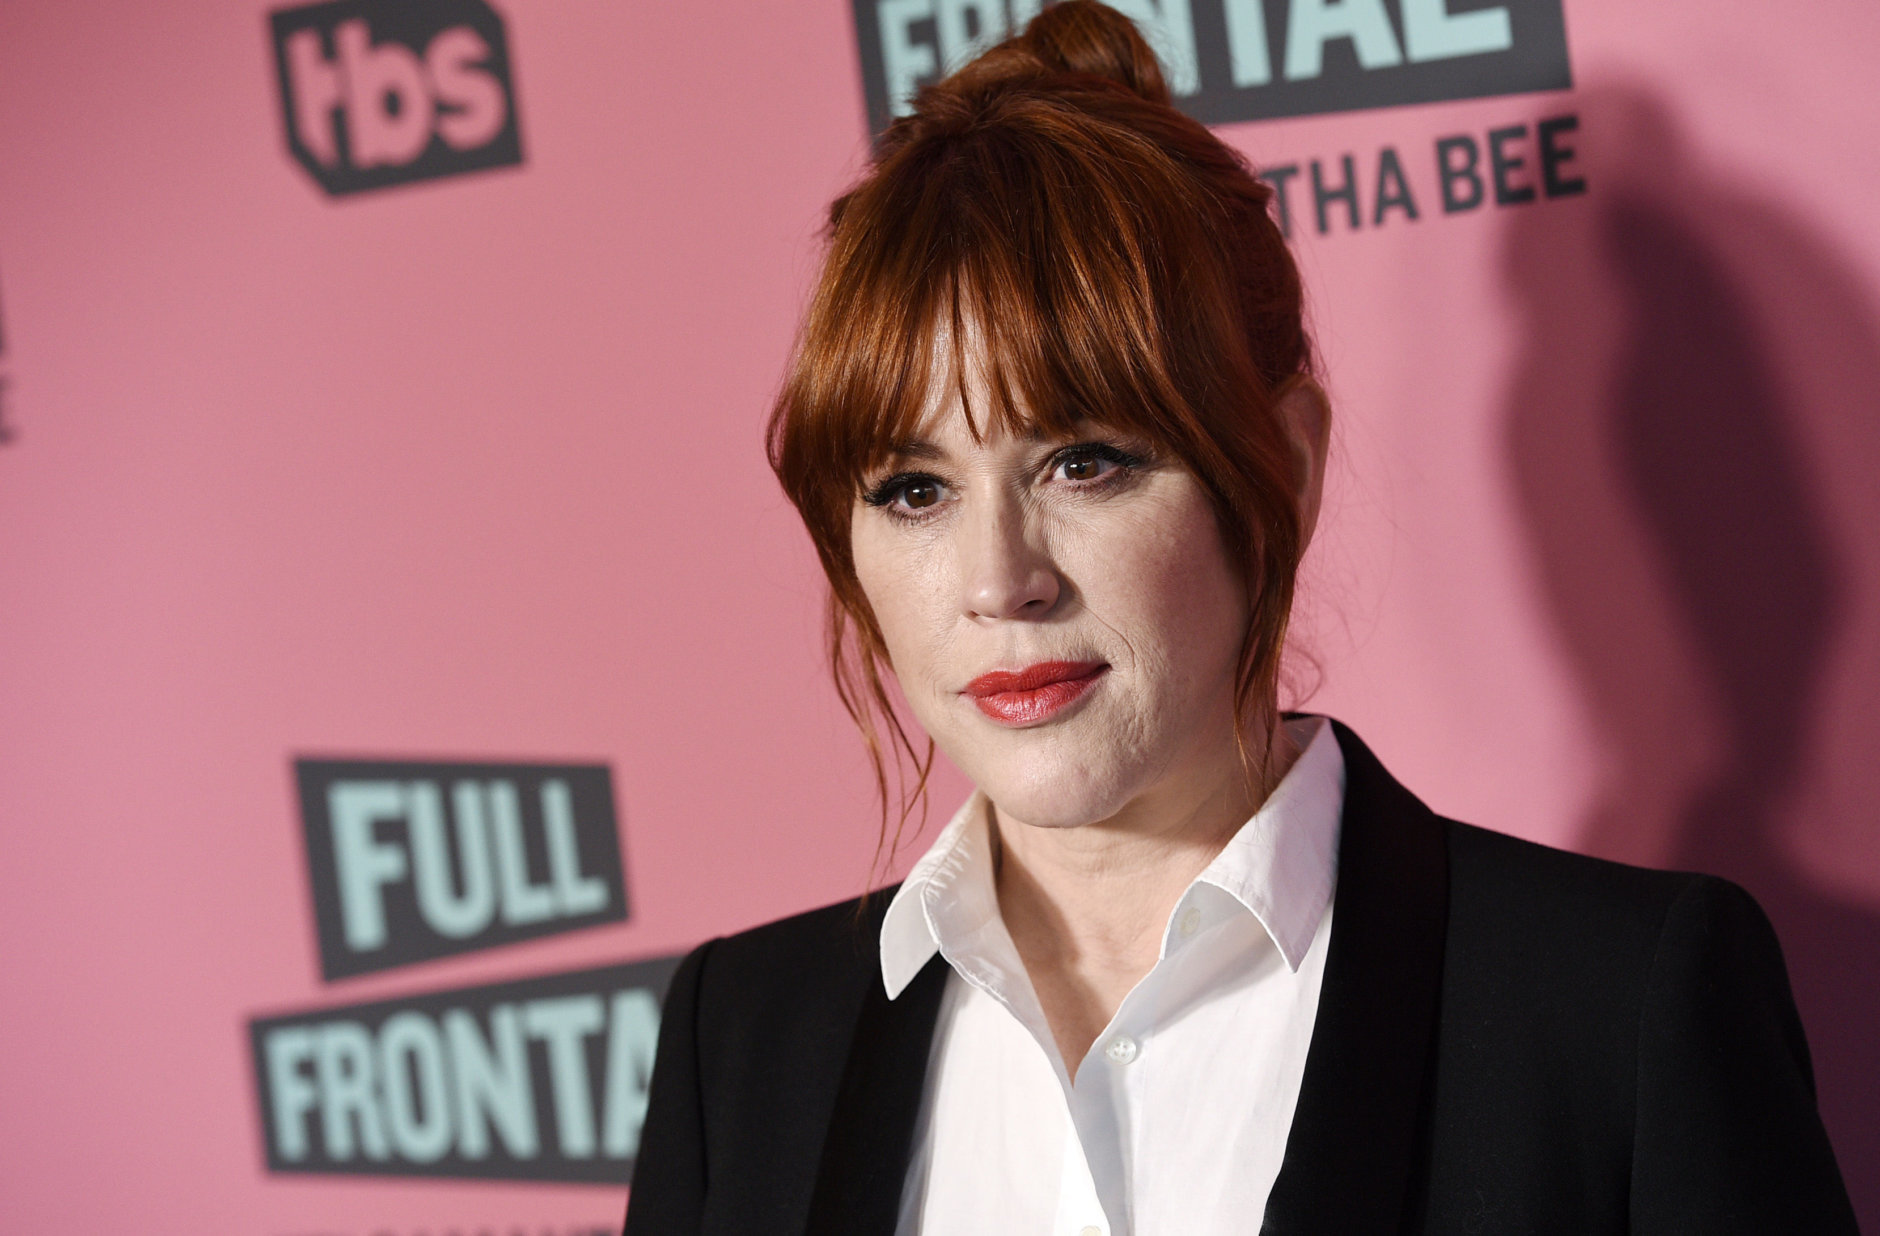 Actress Molly Ringwald, moderator for an Emmy For Your Consideration screening of the television talk show "Full Frontal with Samantha Bee," poses before the event at the Writers Guild Theatre, Thursday, May 24, 2018, in Beverly Hills, Calif. (Photo by Chris Pizzello/Invision/AP)